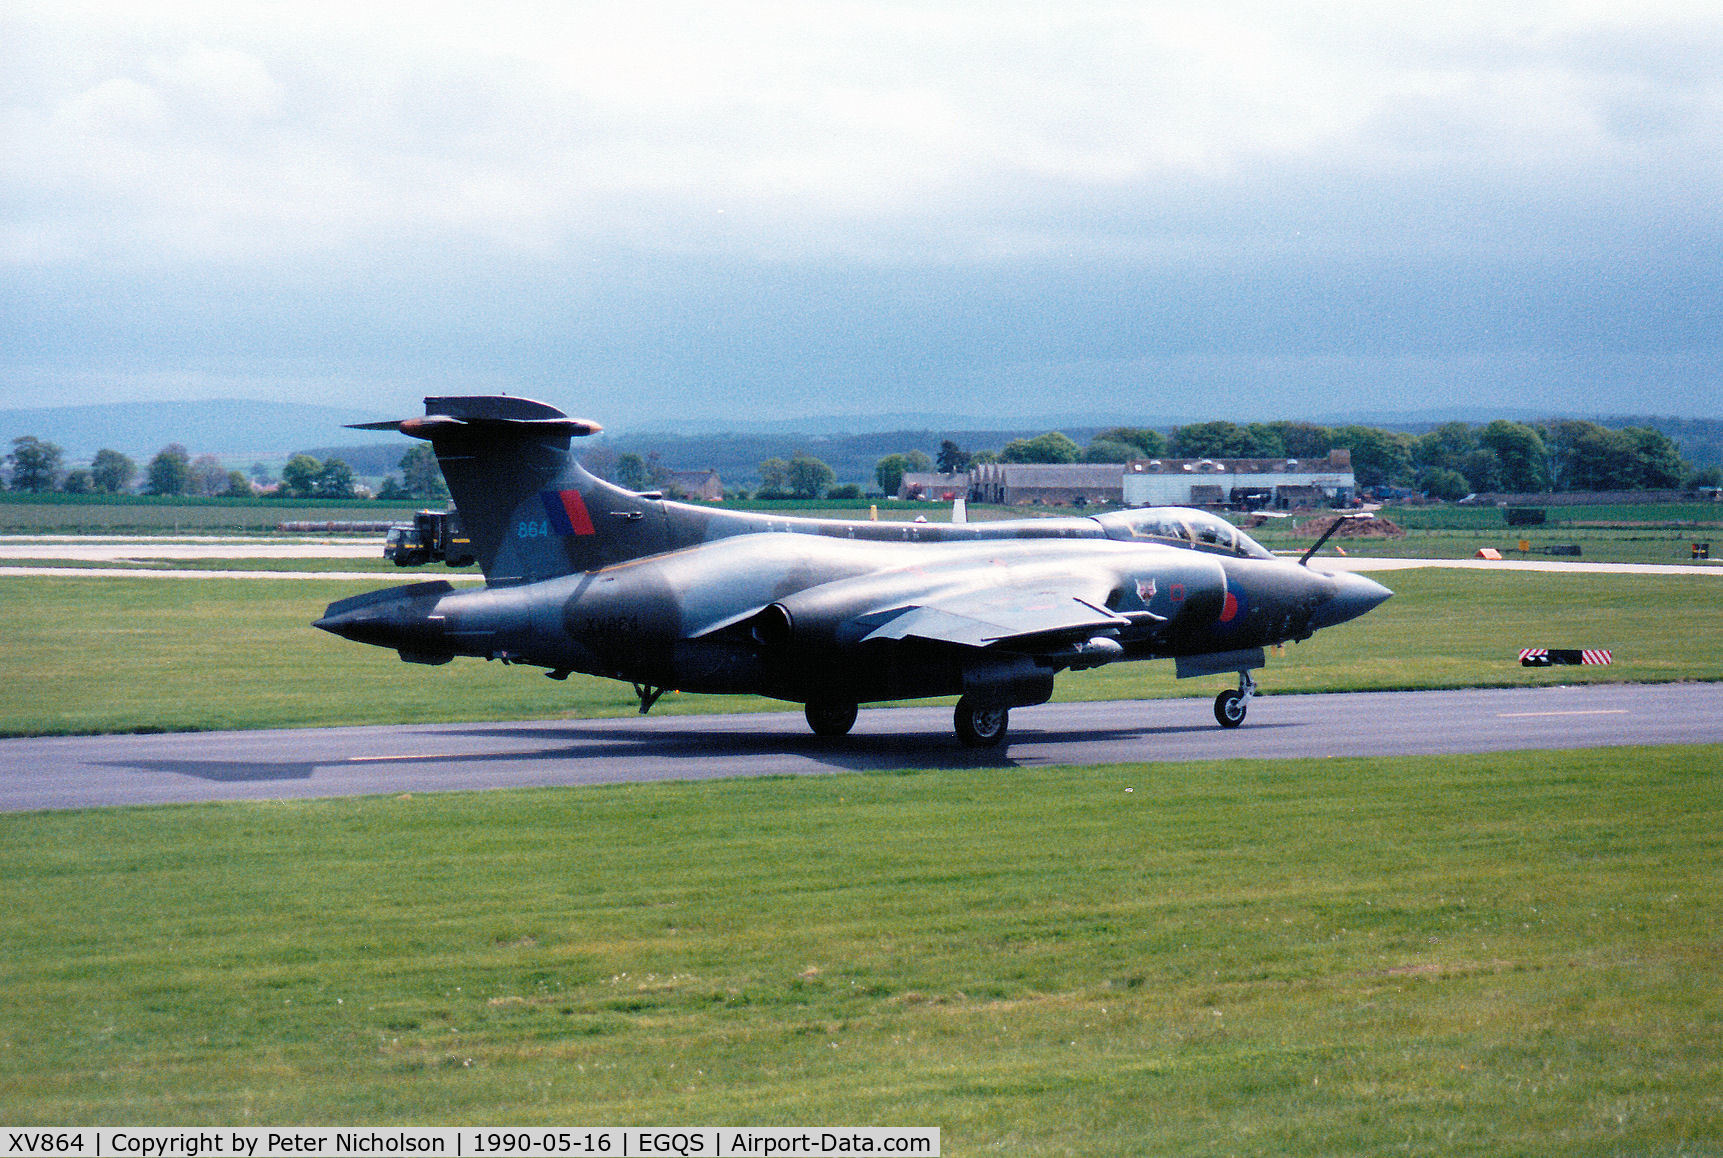 XV864, 1968 Hawker Siddeley Buccaneer S.2B C/N B3-13-67, Buccaneer S.2B of 12 Squadron taxying to Runway 05 at RAF Lossiemouth in May 1990.